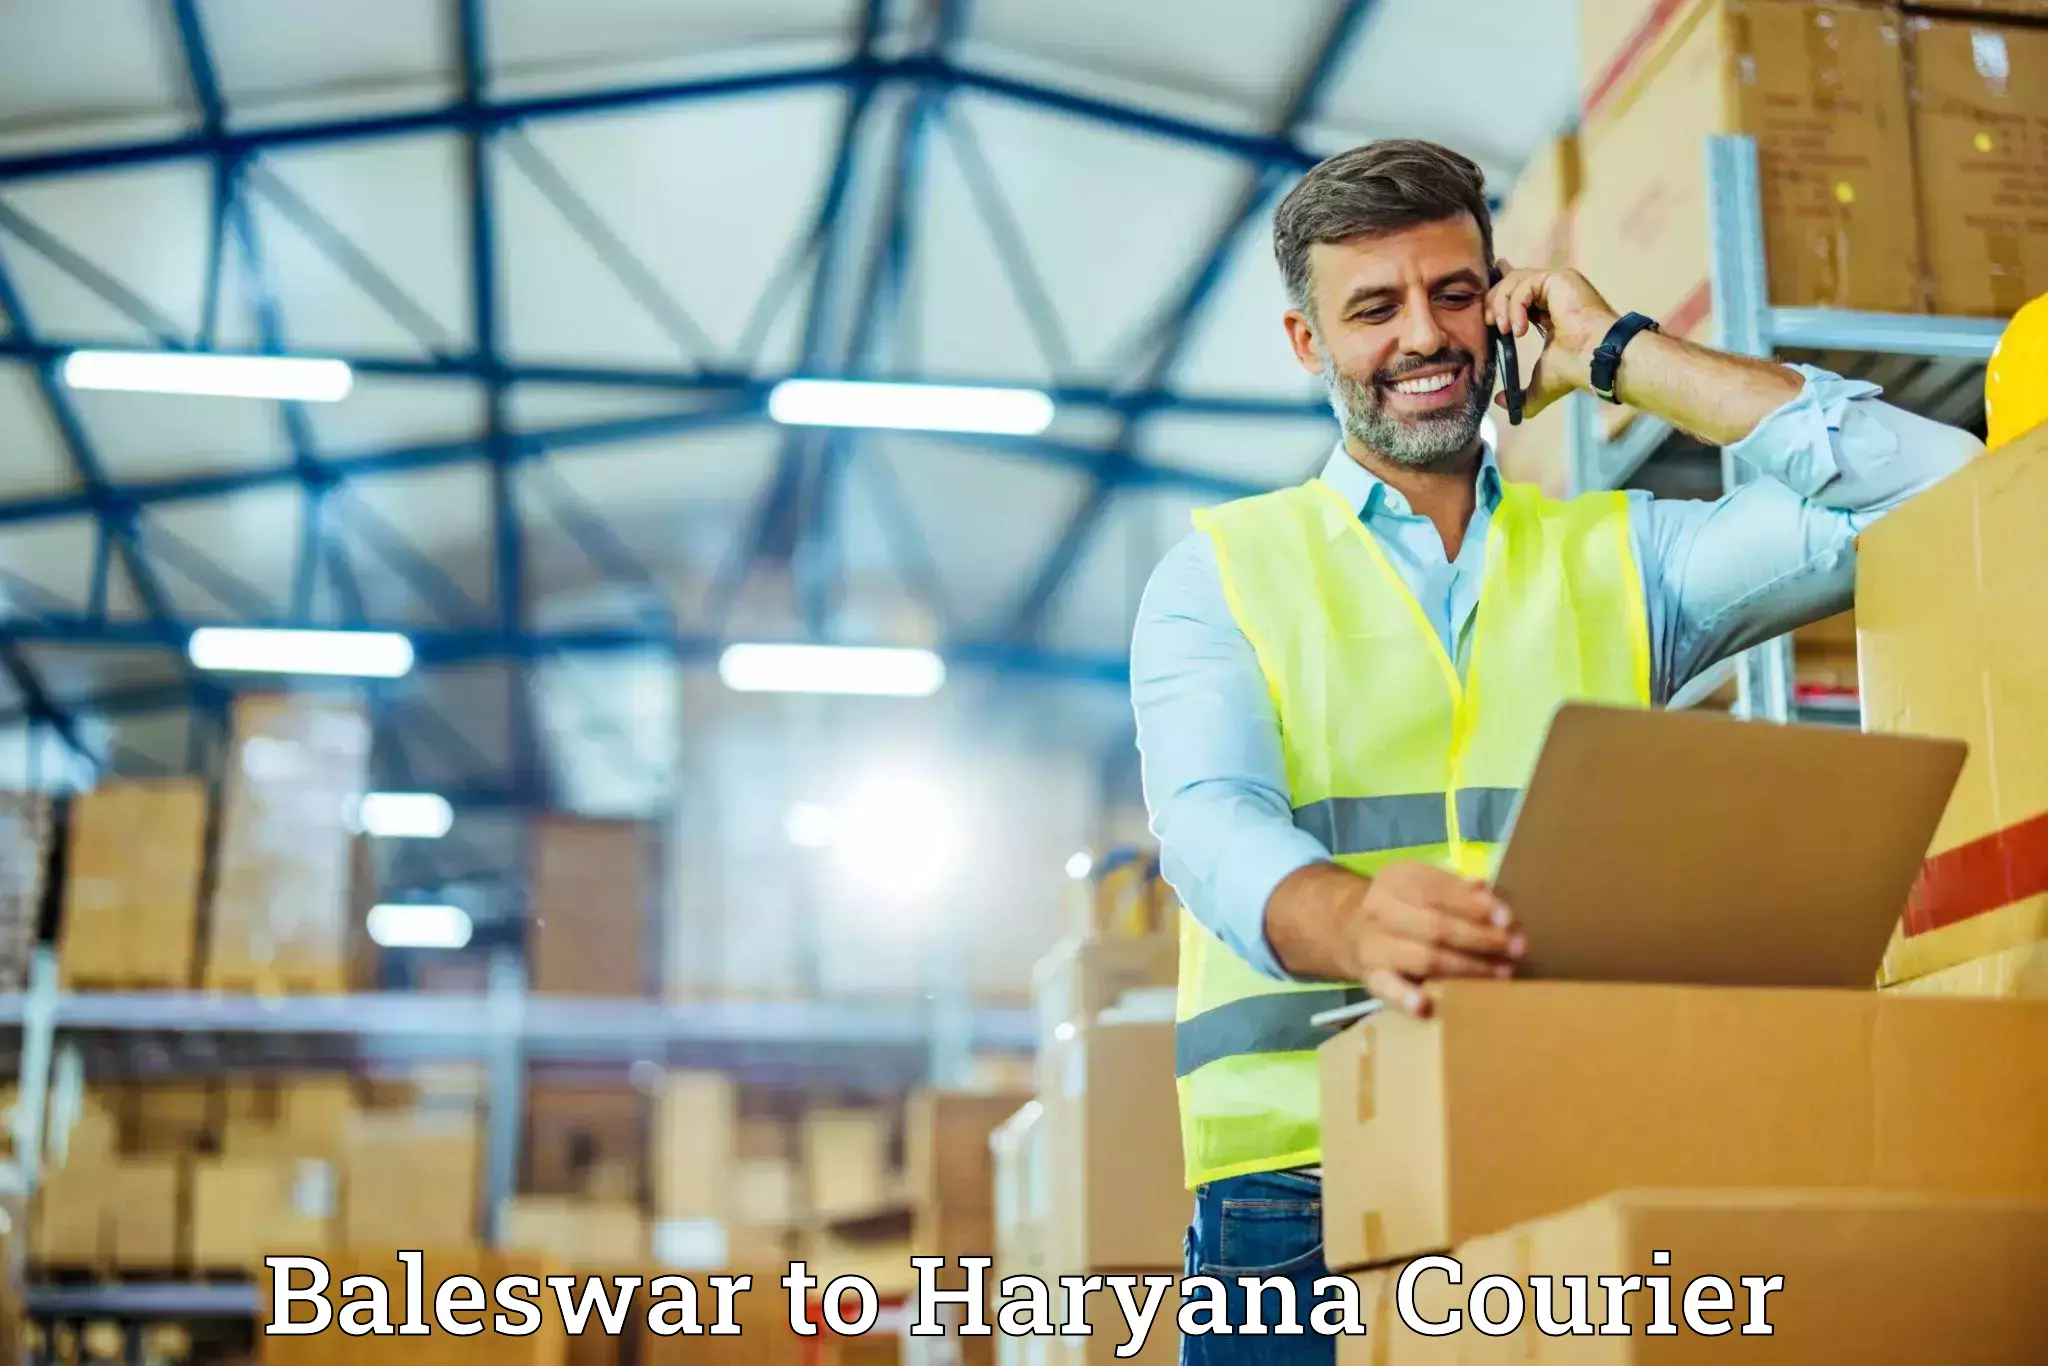 Furniture delivery service Baleswar to NCR Haryana